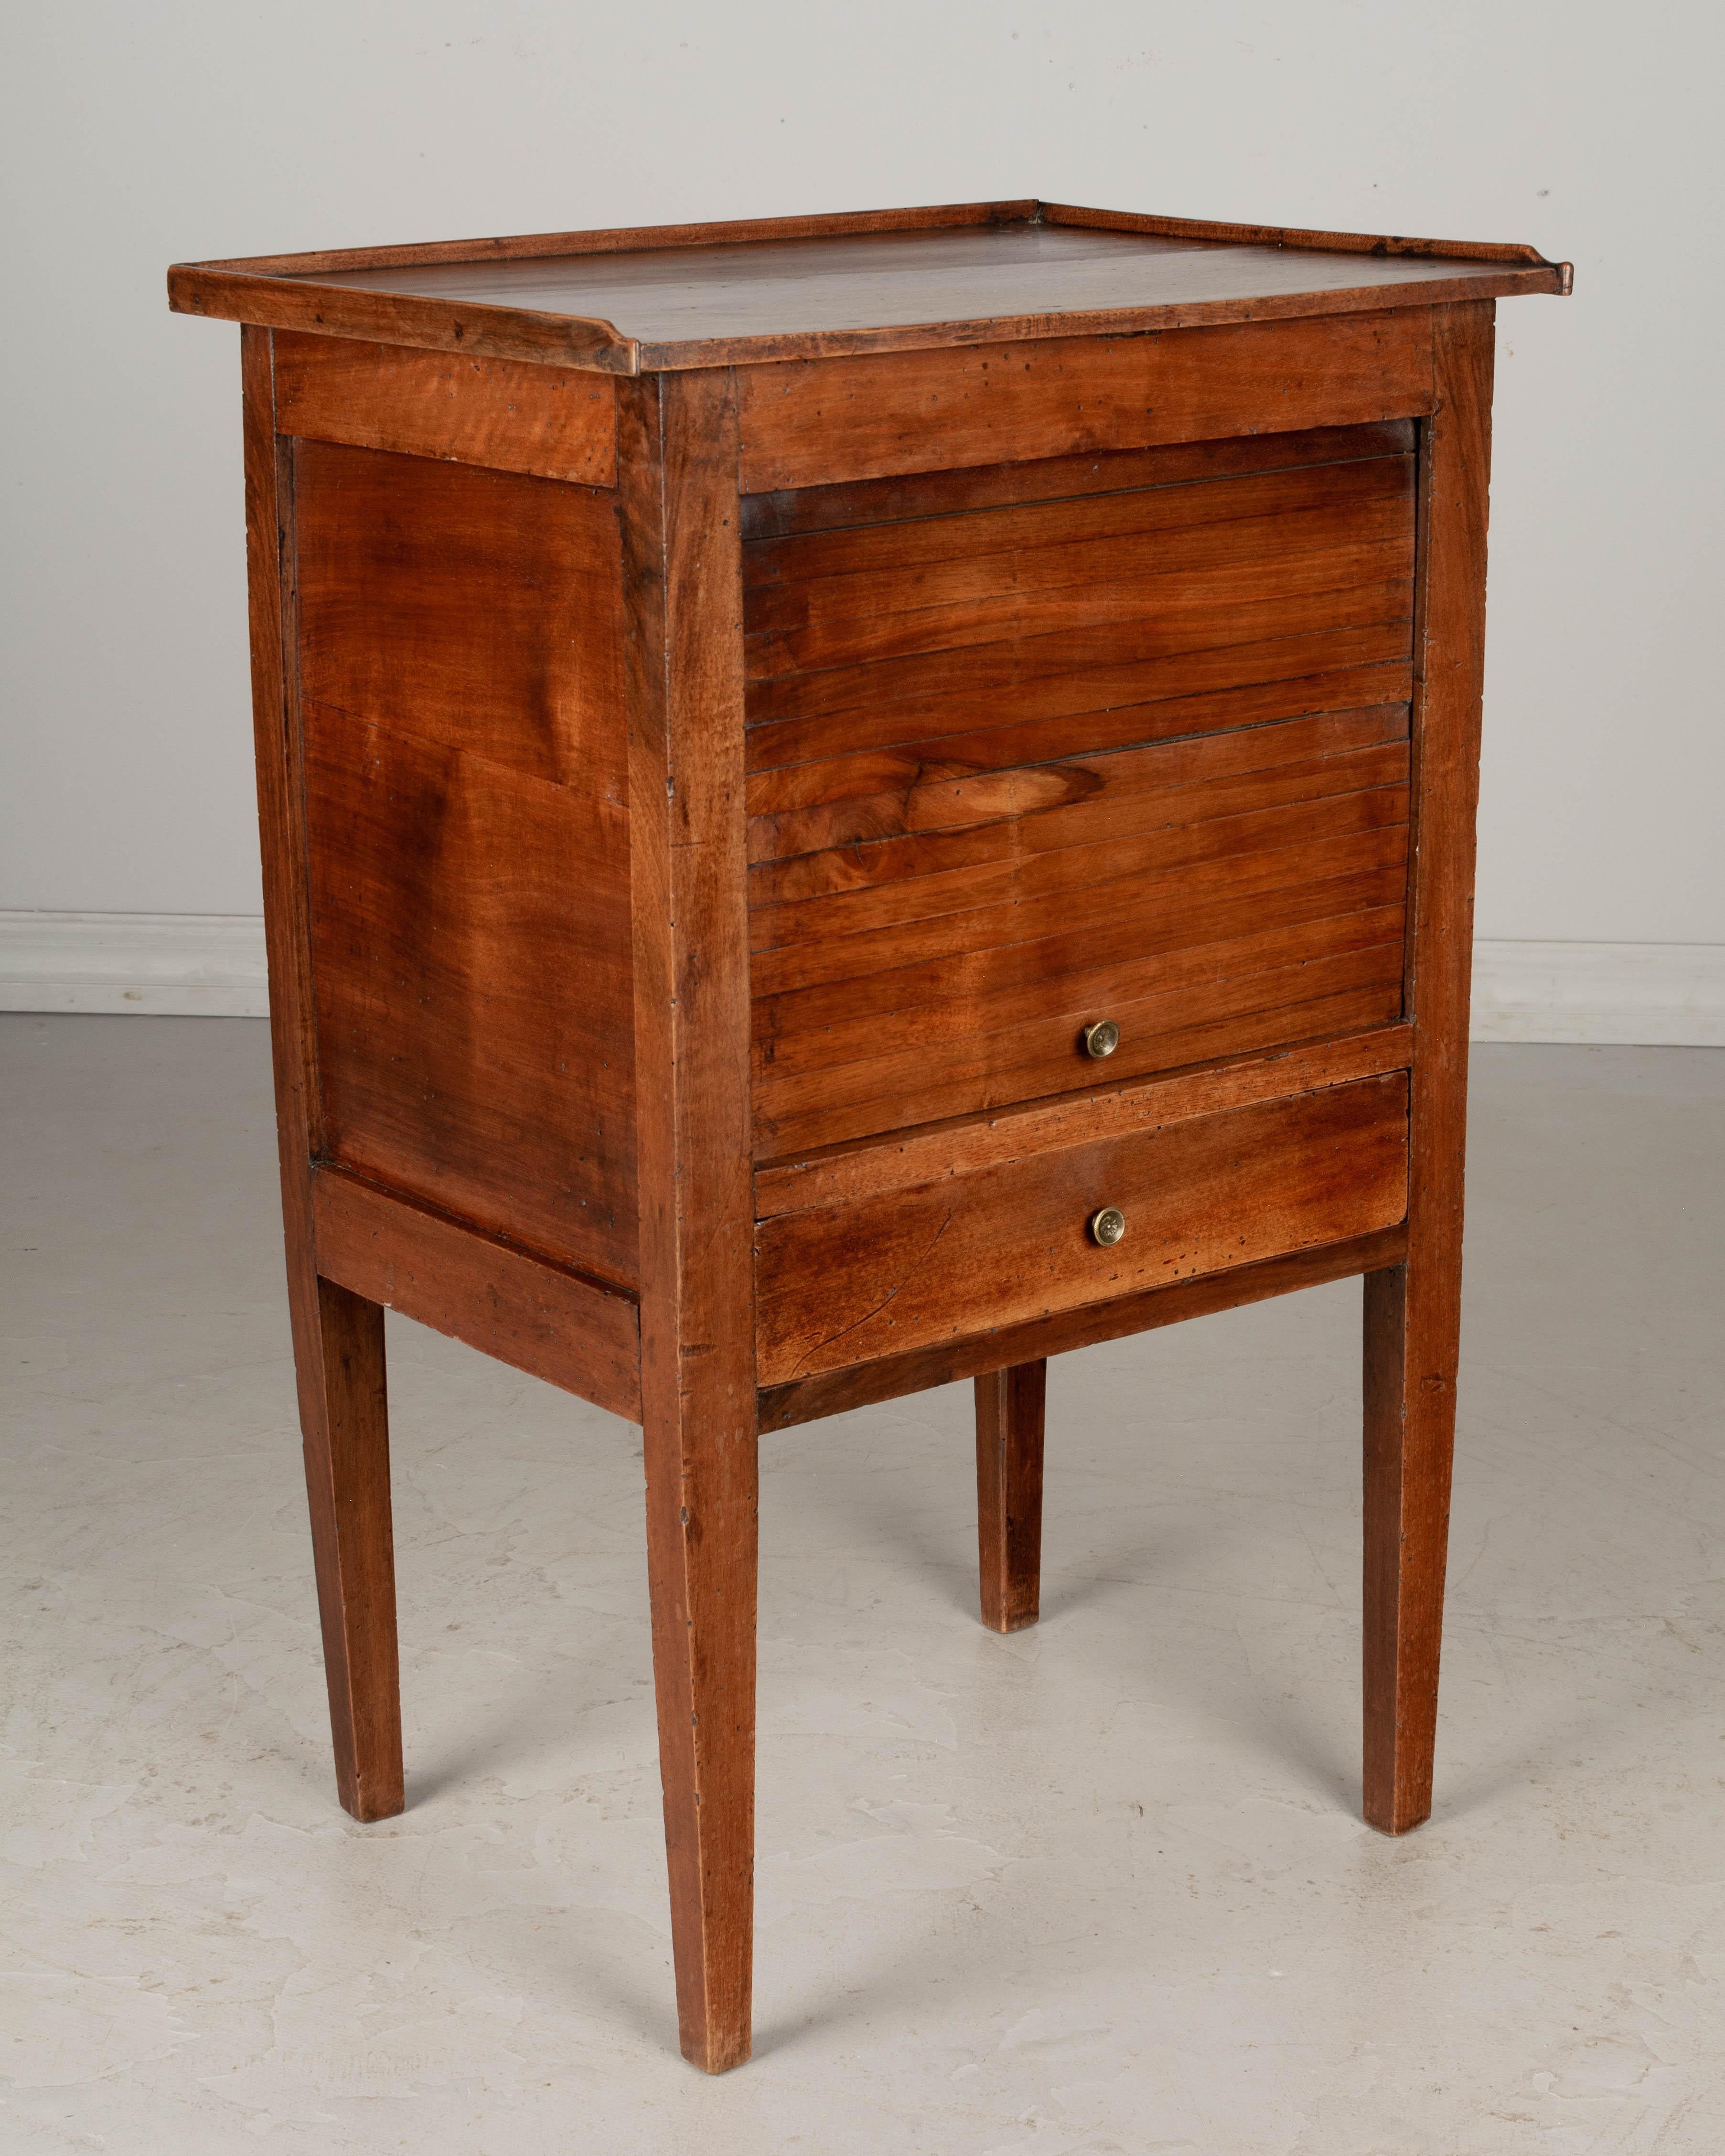 A 19th century French Country walnut side table with a vertical tambour door above a dovetailed drawer. Finished on all four sides. Small brass knobs. One interior shelf. Waxed patina. All original. May be used as a bedside table.